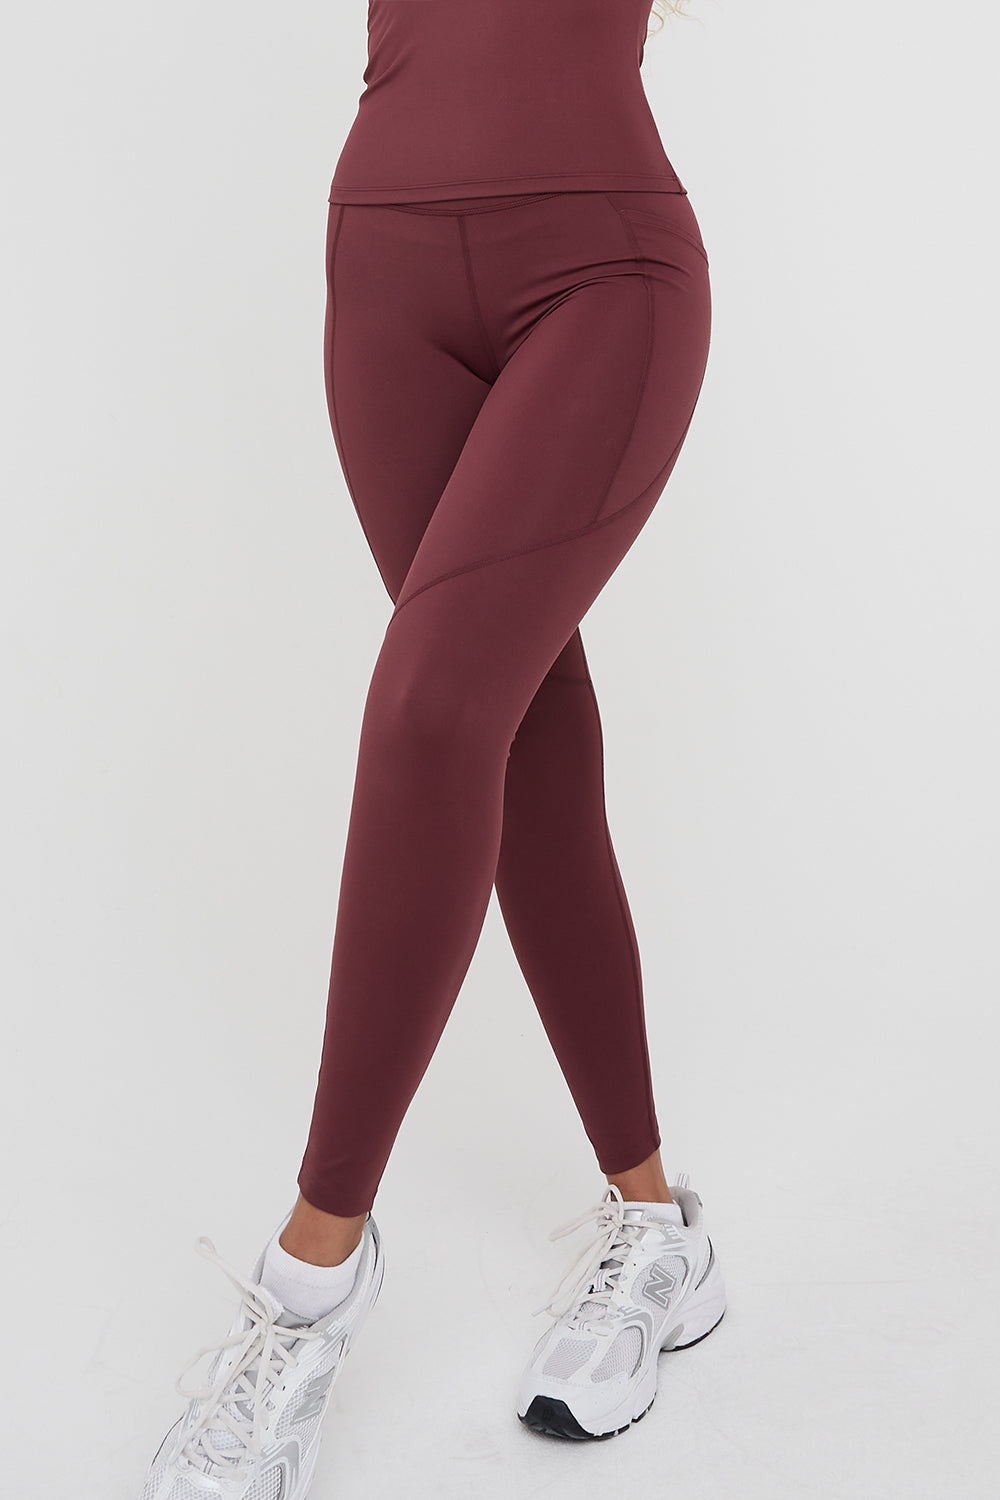 PLUS SIZE COLOURFUL YOGA BAND LEGGING CAPRIS WITH POCKETS – Luv 21